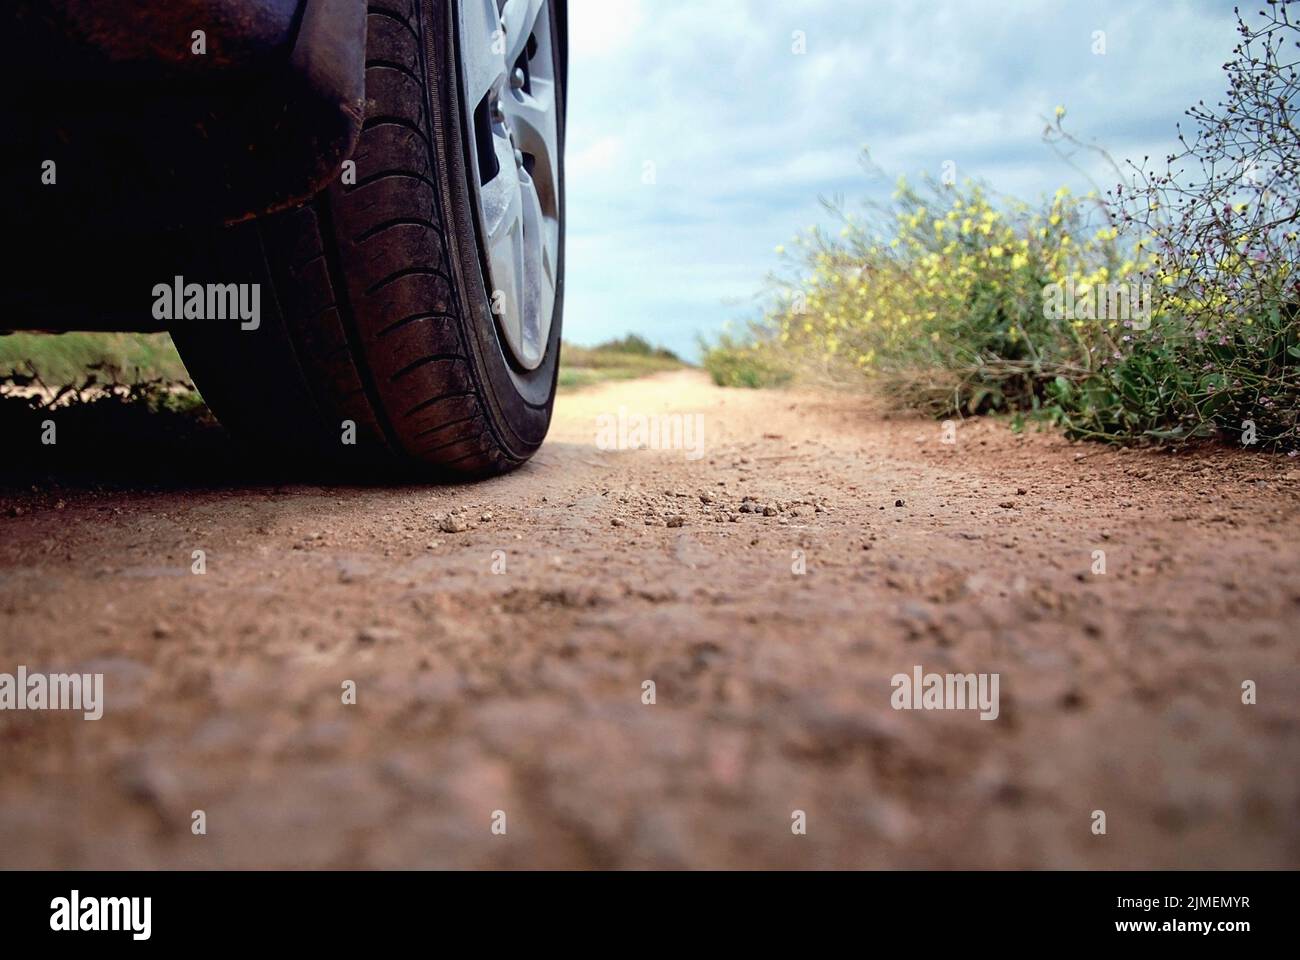 Car wheel on the road, low angle shot, road trip and adventuring Stock Photo